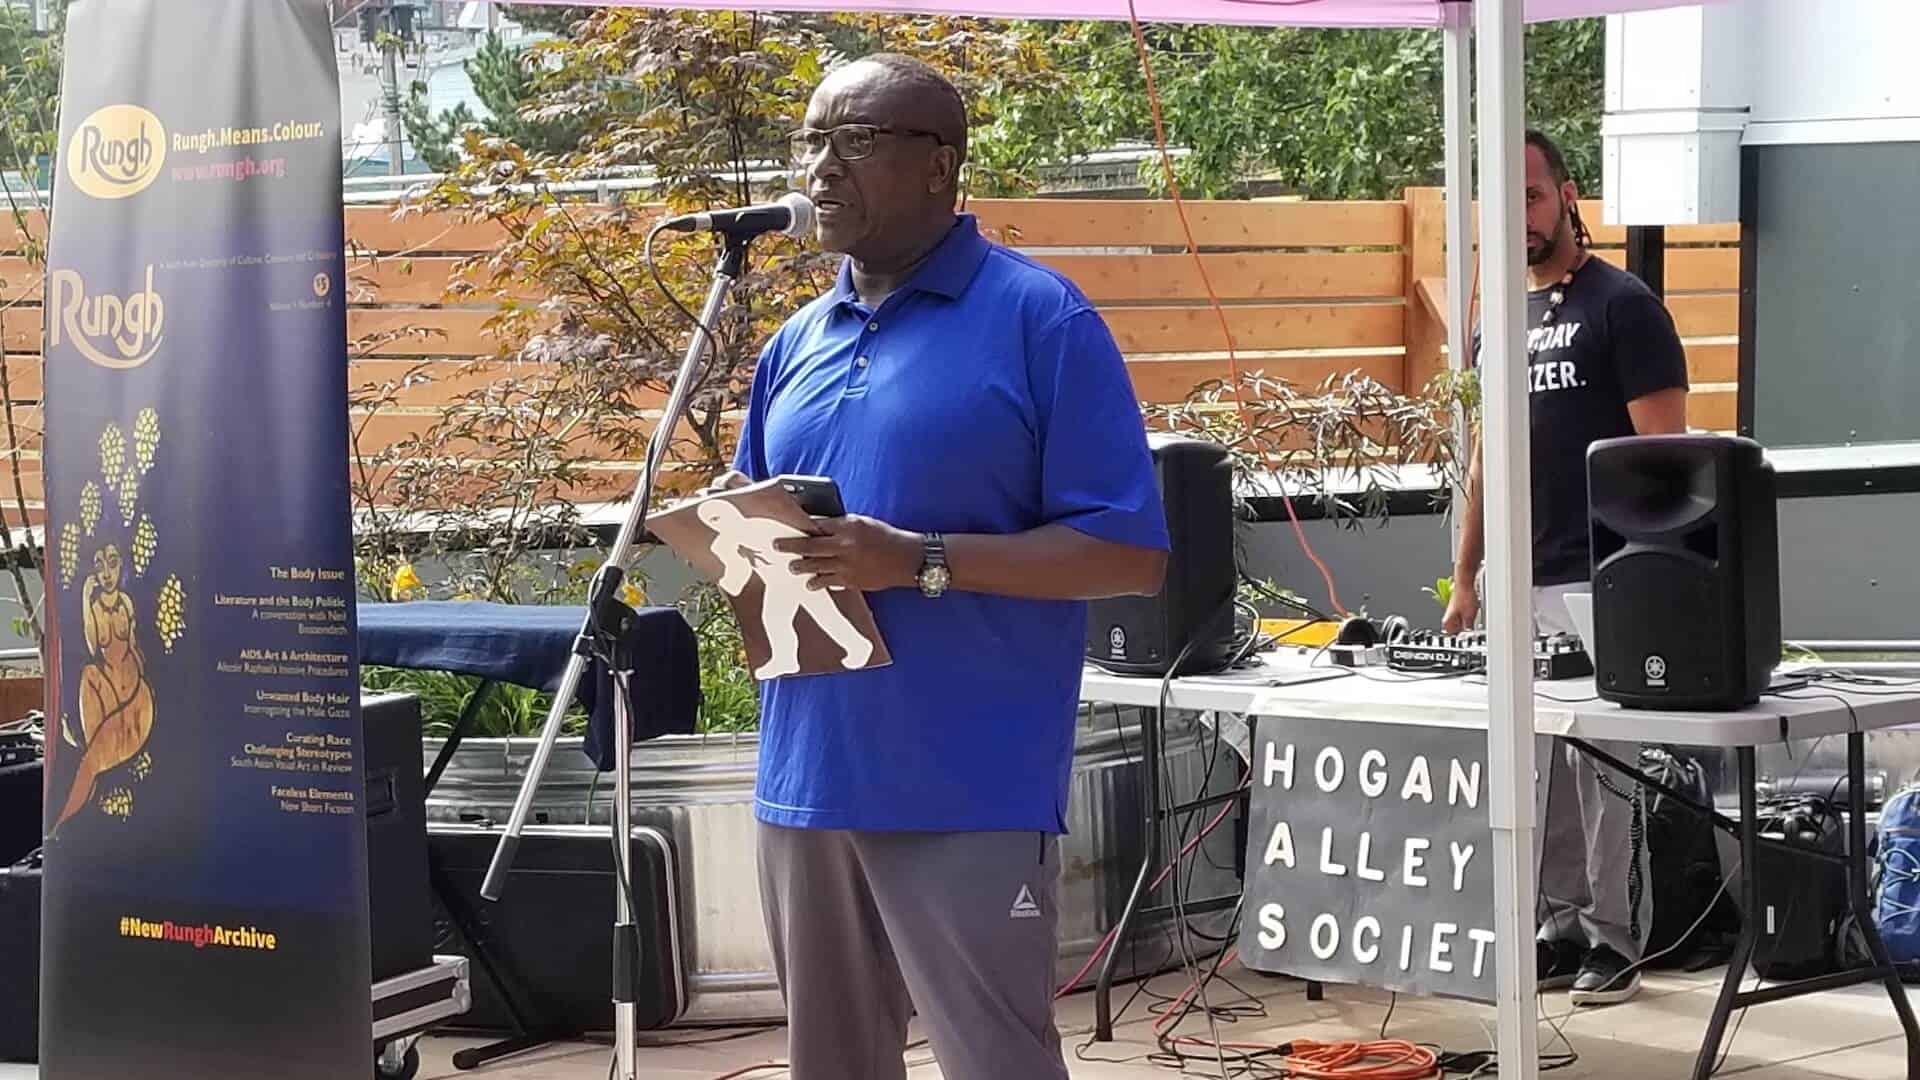 Summer Block Party: Rungh Readings With Hogan's Alley Society 3